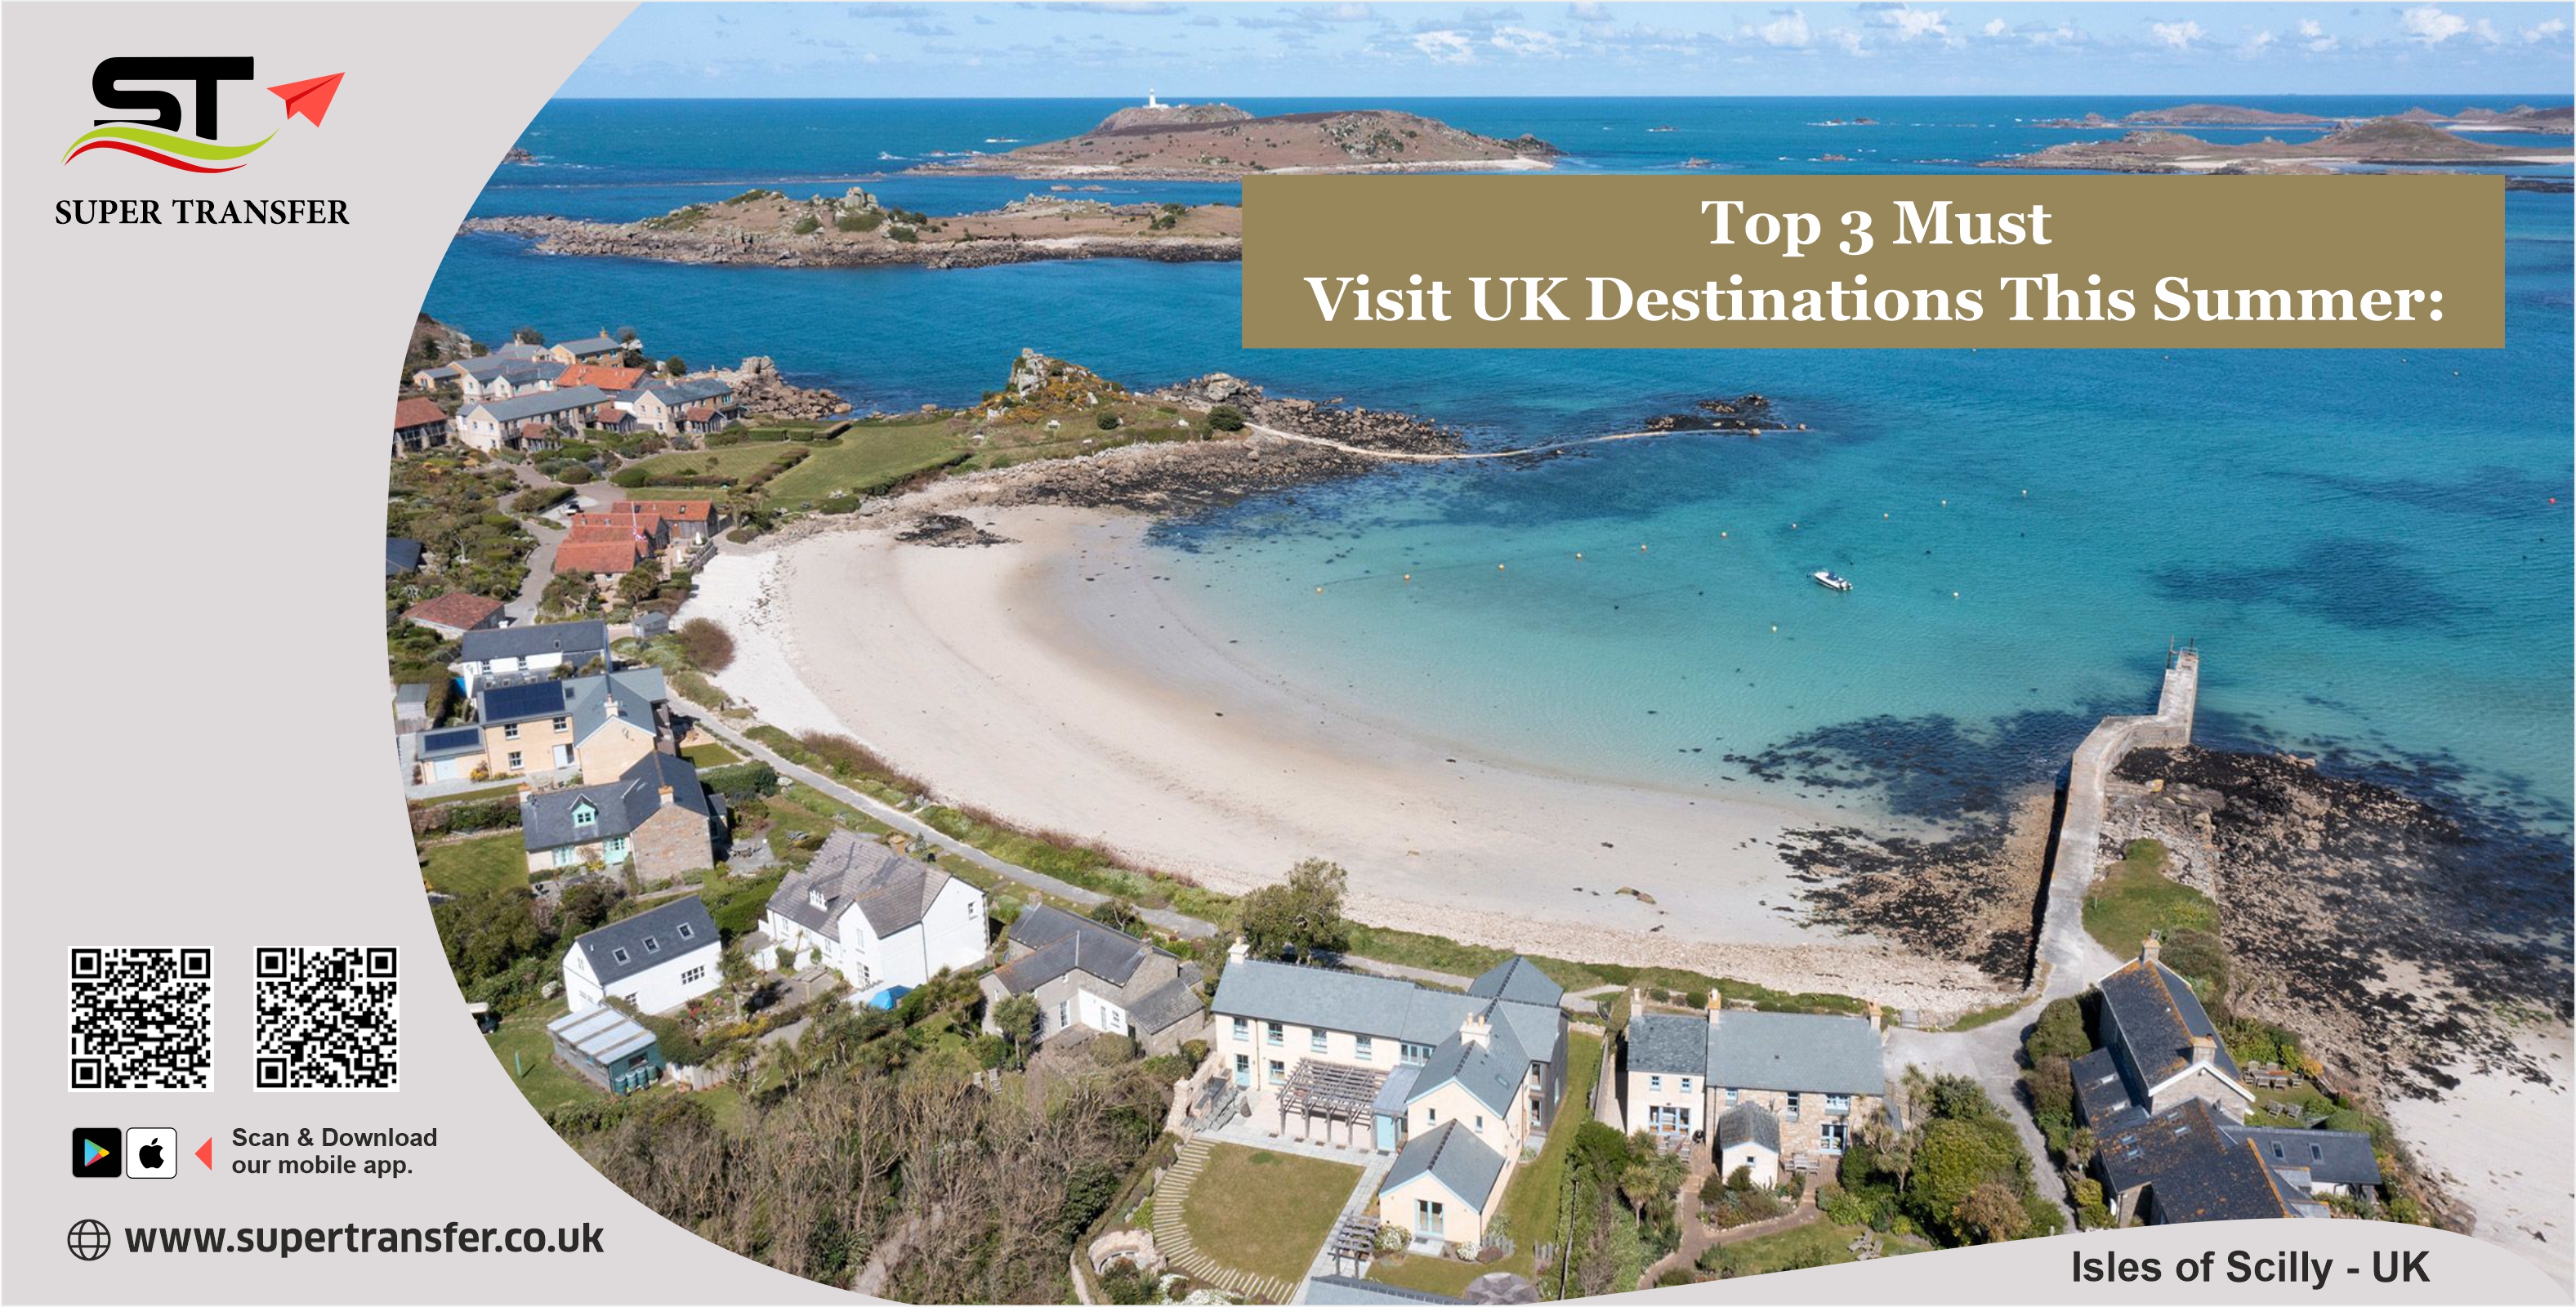 Top 3 UK Destinations You Must Visit This Summer